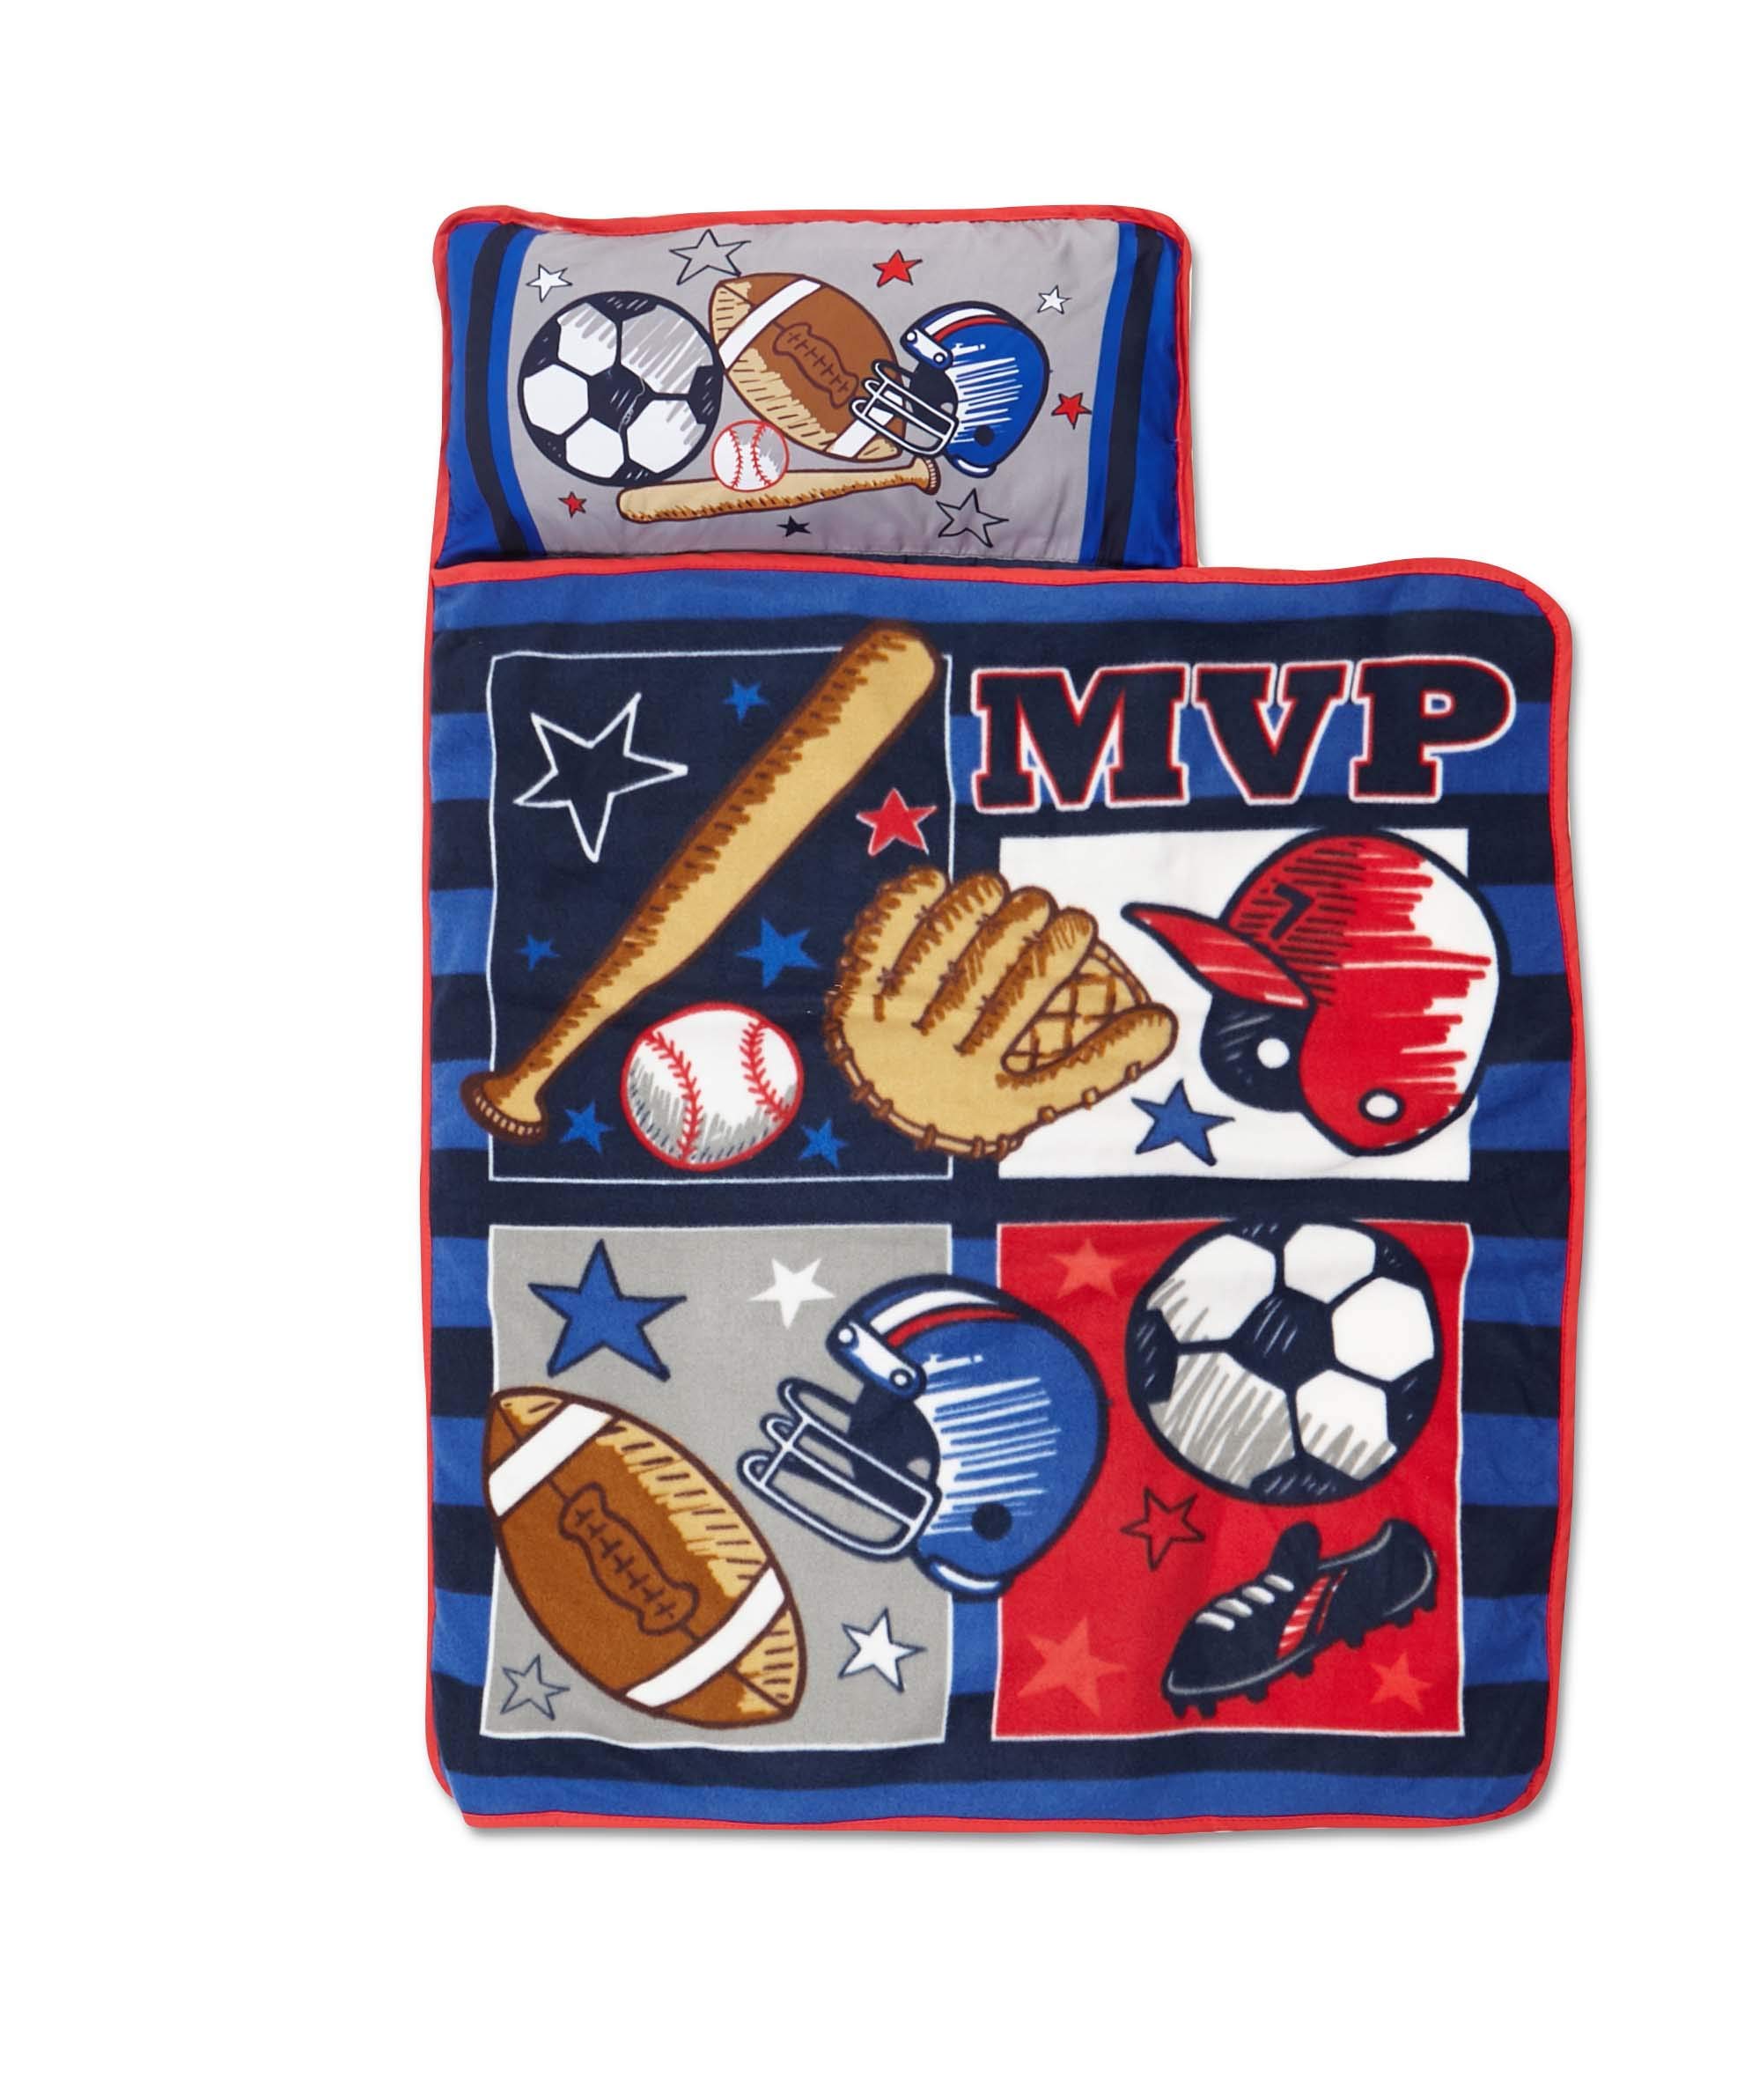 Baby Boom Funhouse MVP Sports Nap Mat Set - Includes Pillow and Fleece Blanket – Great for Boys Napping during Daycare or Preschool - Fits Toddlers, Blue